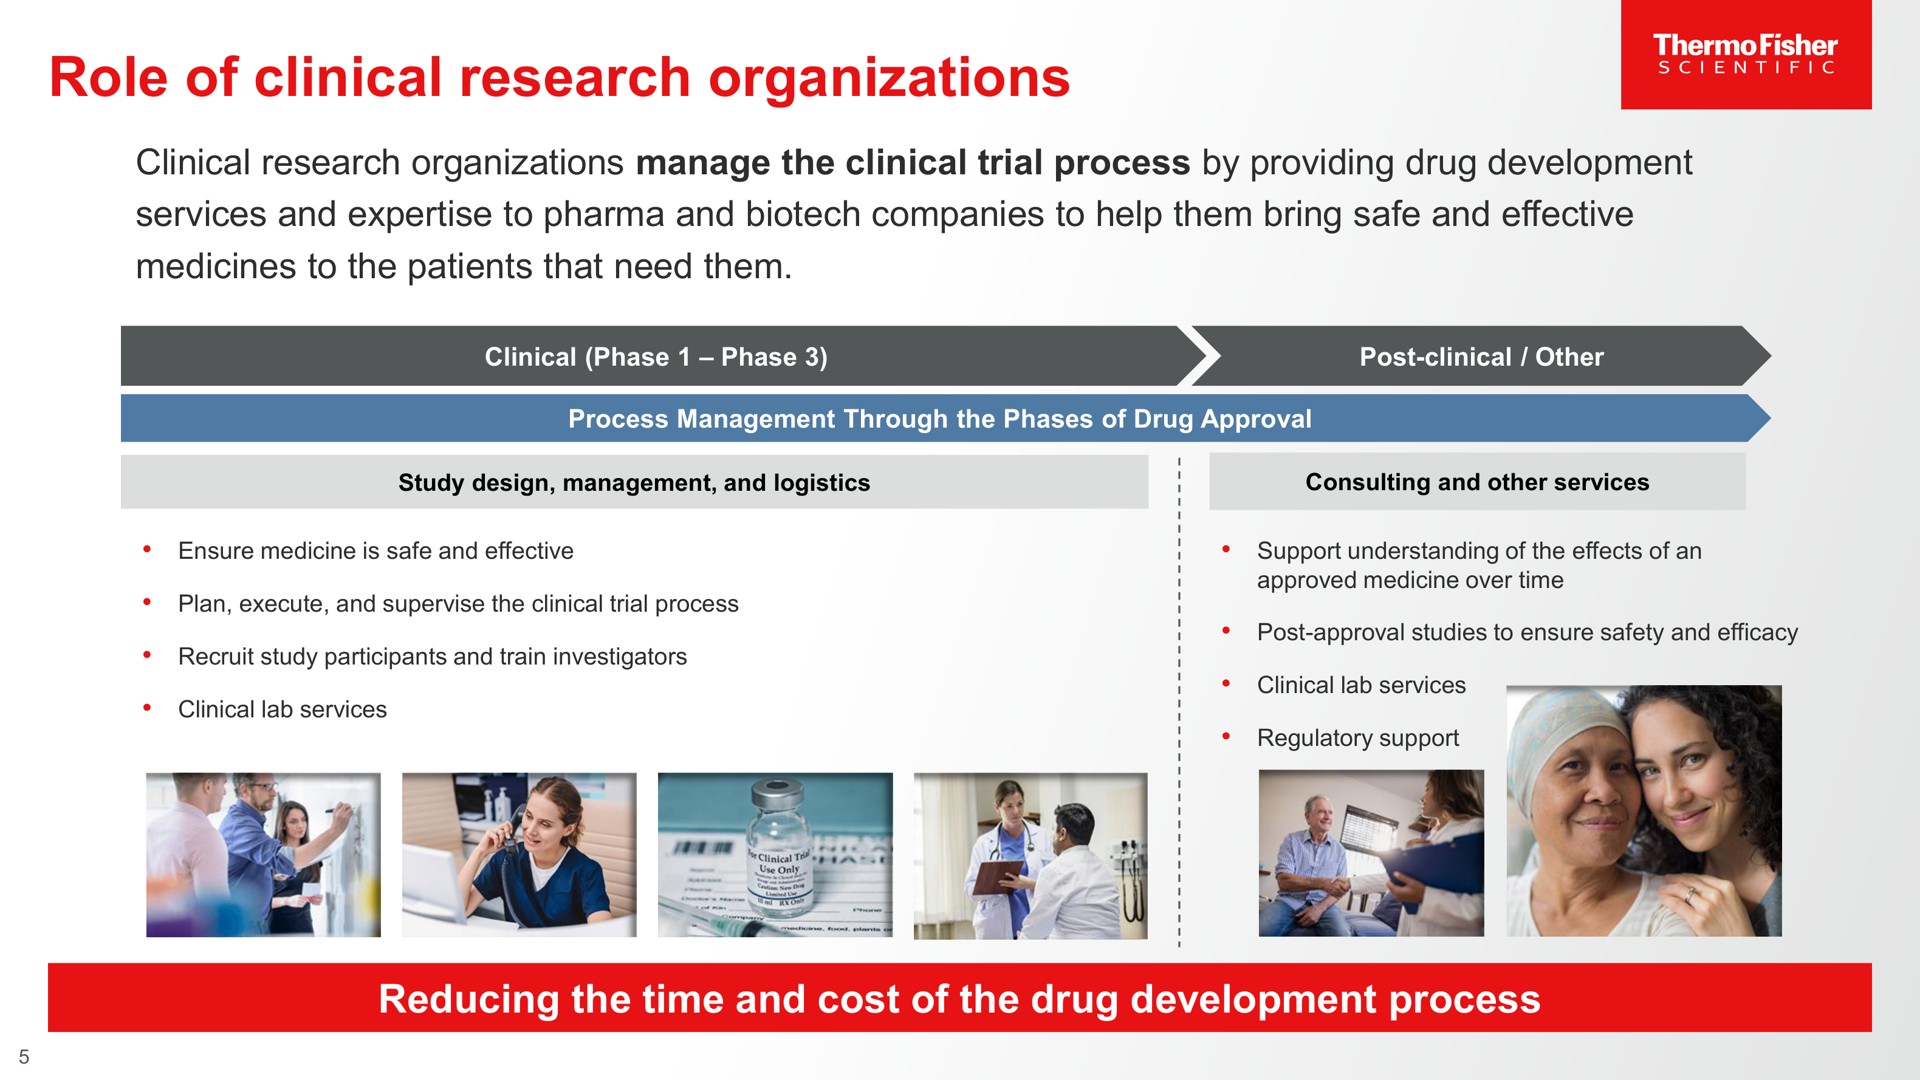 role of clinical research organizations | Thermo Fisher